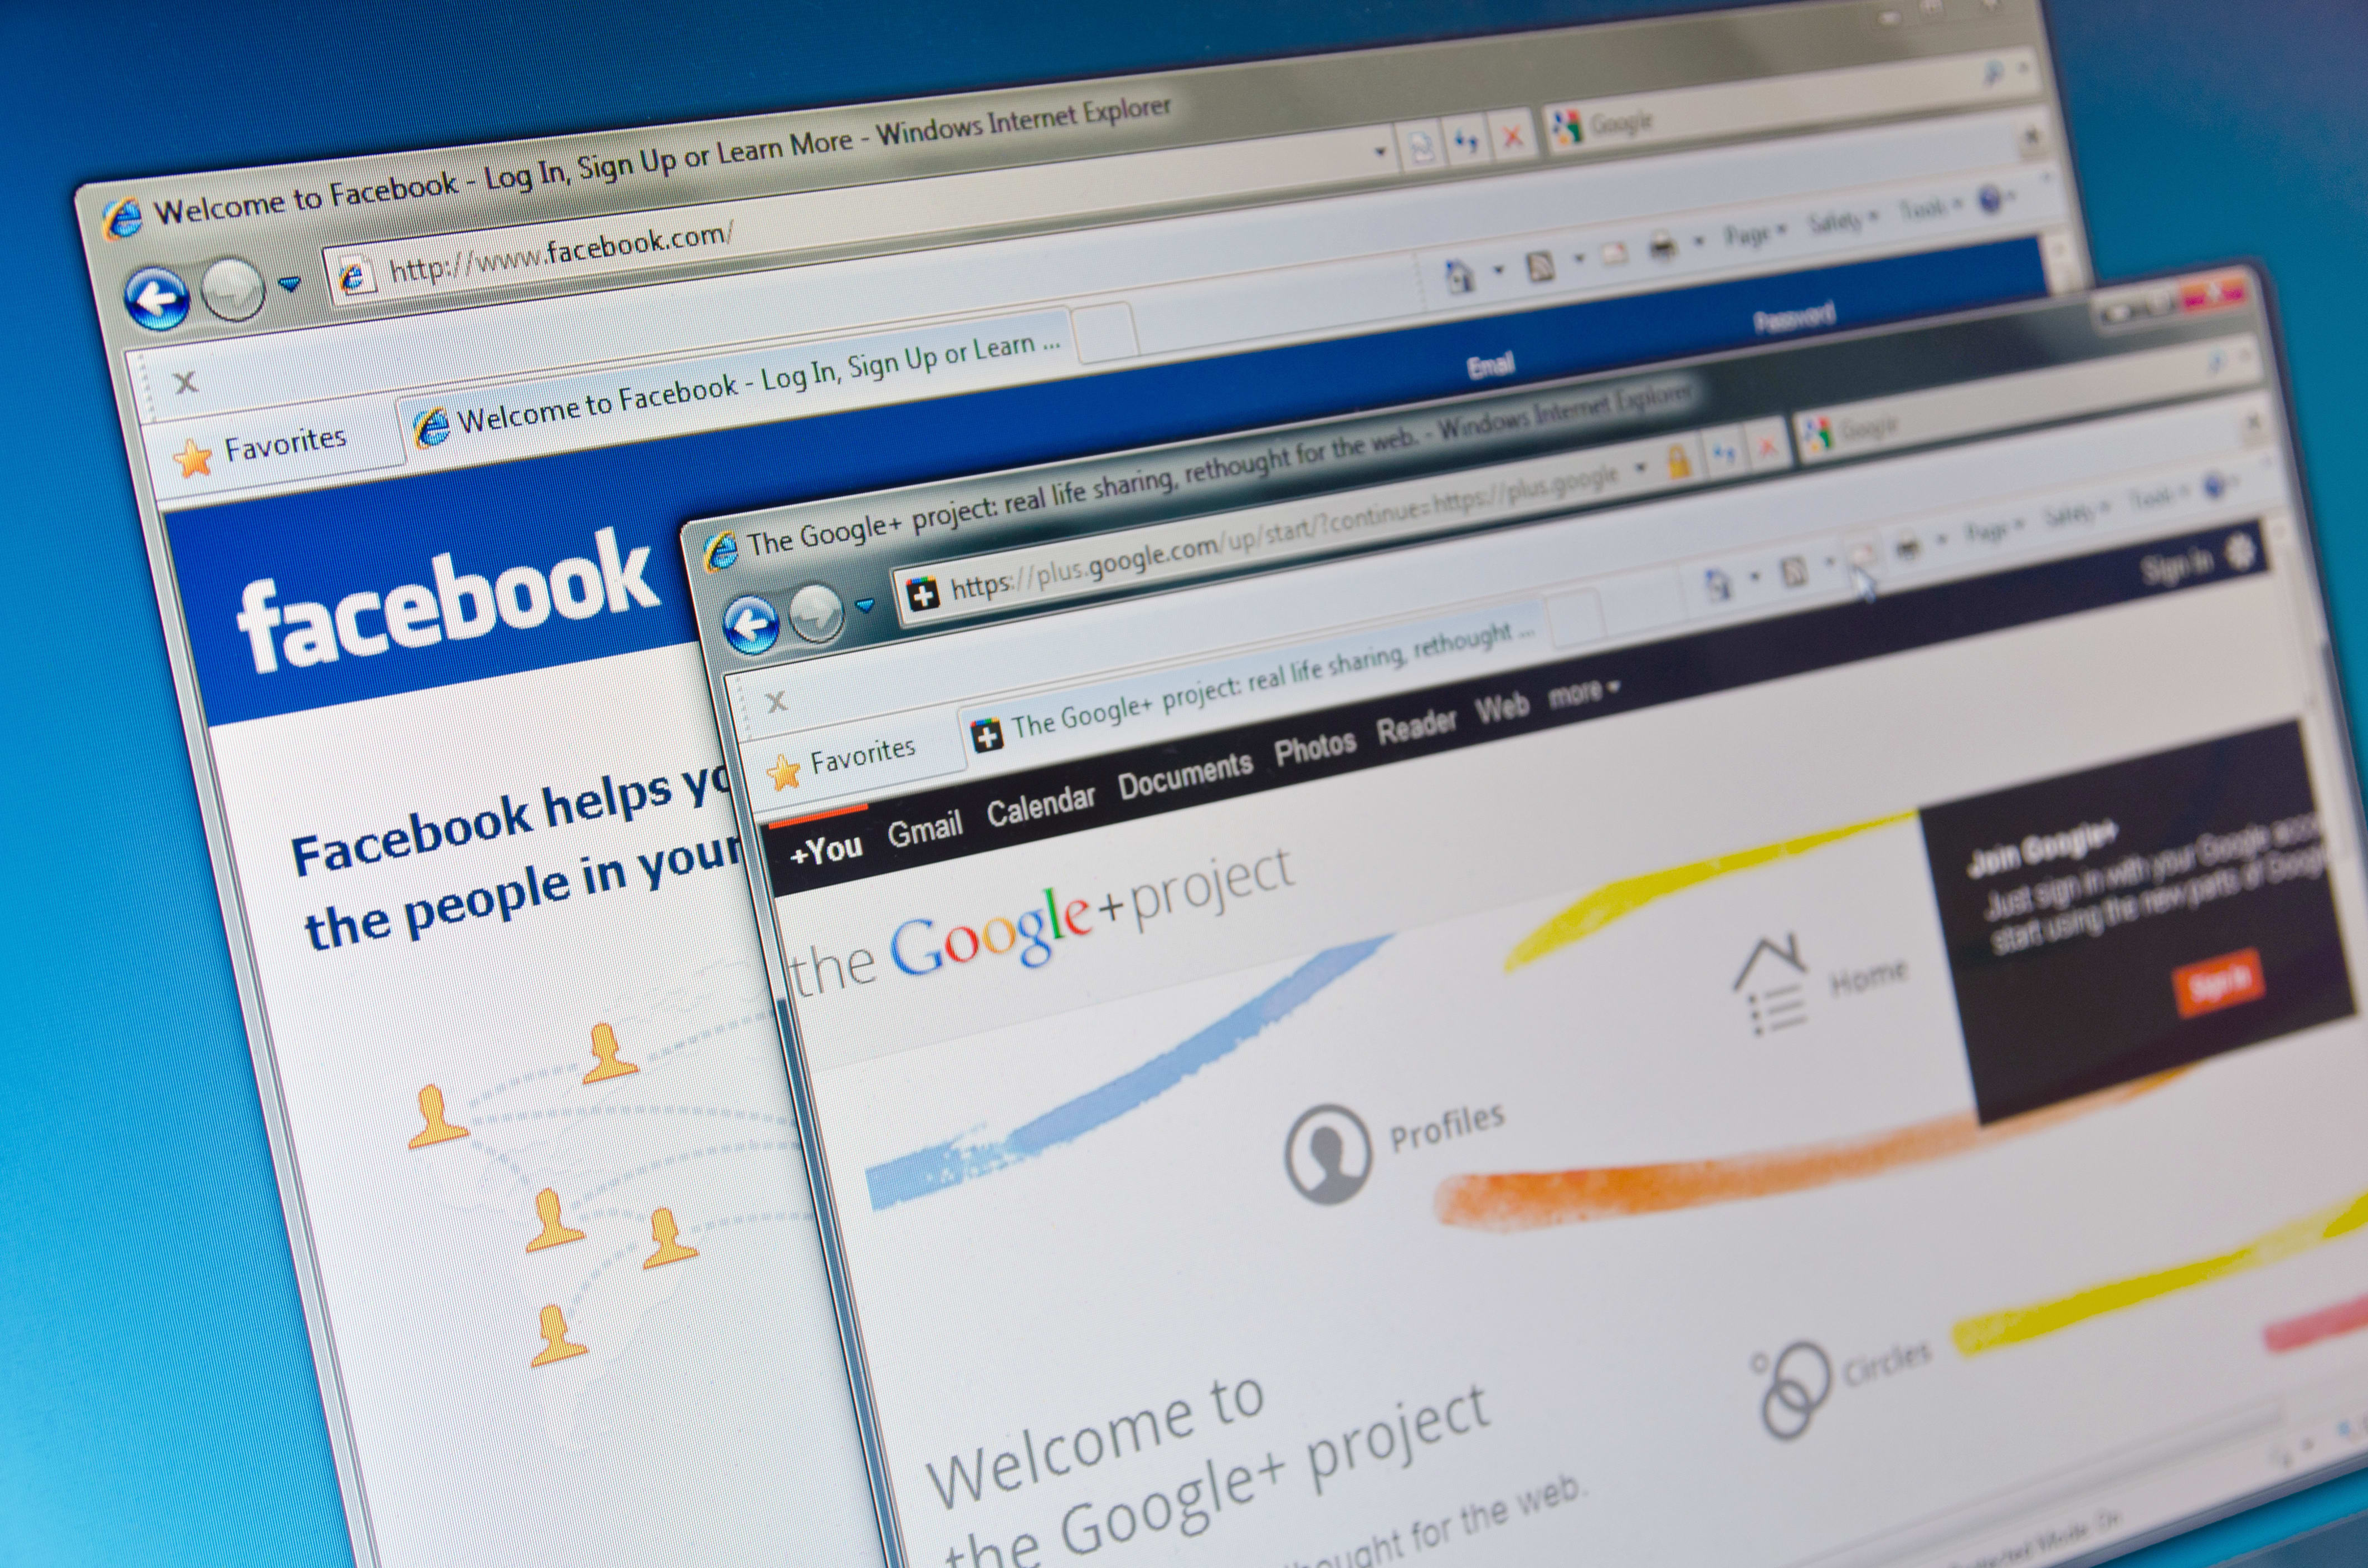 What Facebook and Google can learn from the Internet Explorer case